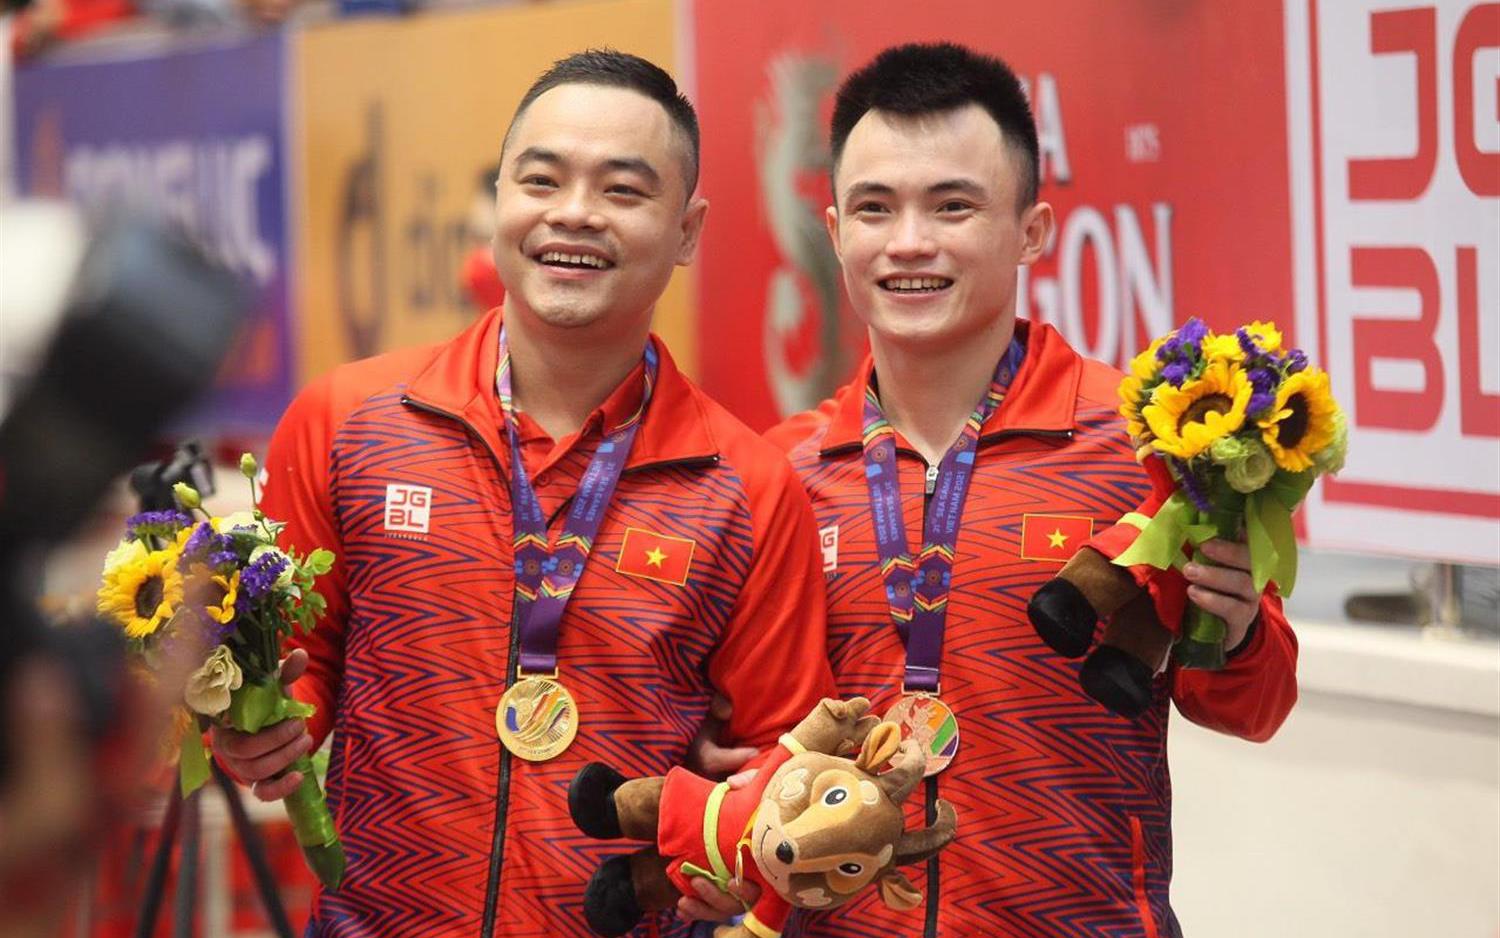 Which Vietnamese athletes won the 31st SEA Games medal on May 14?